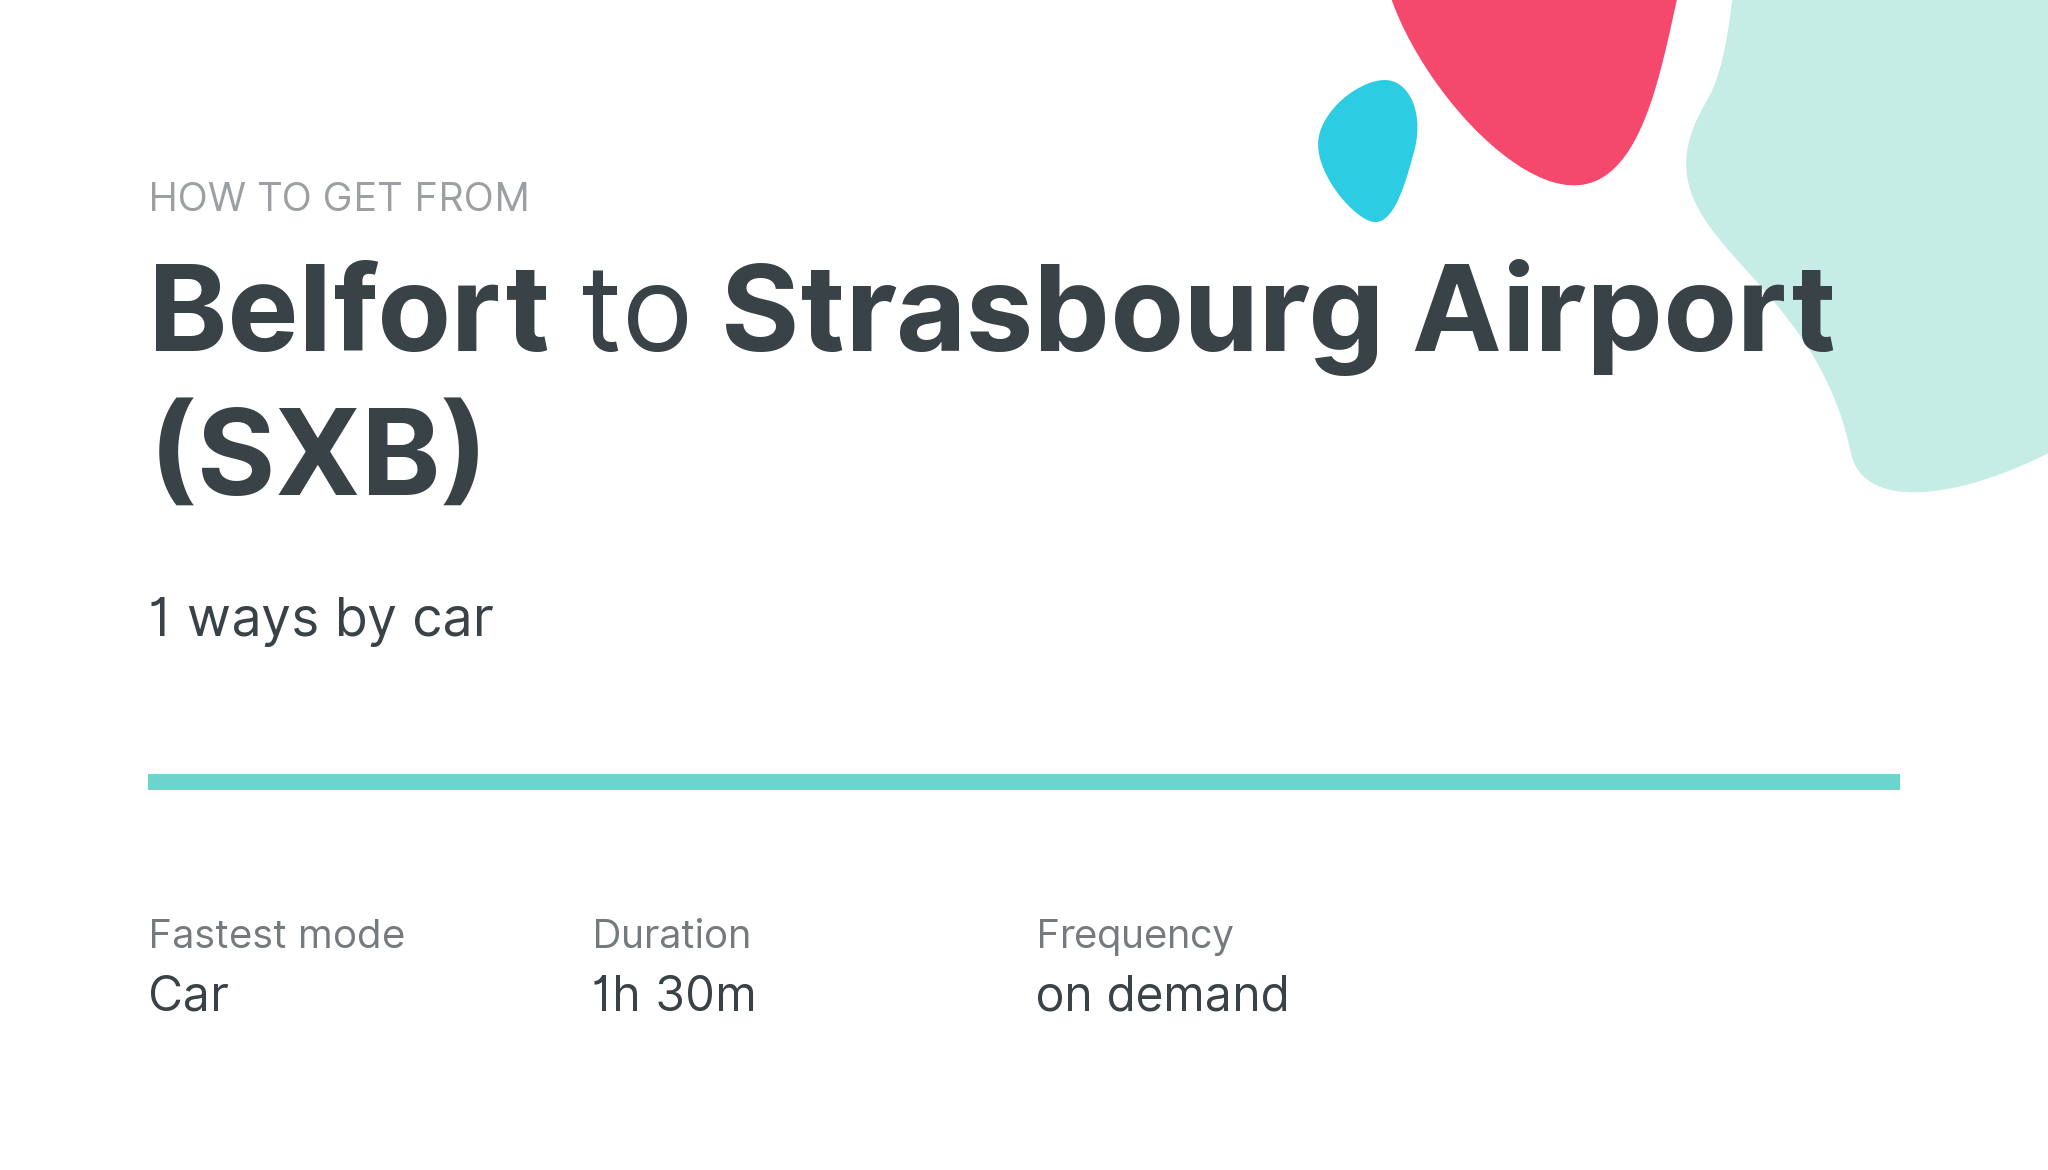 How do I get from Belfort to Strasbourg Airport (SXB)